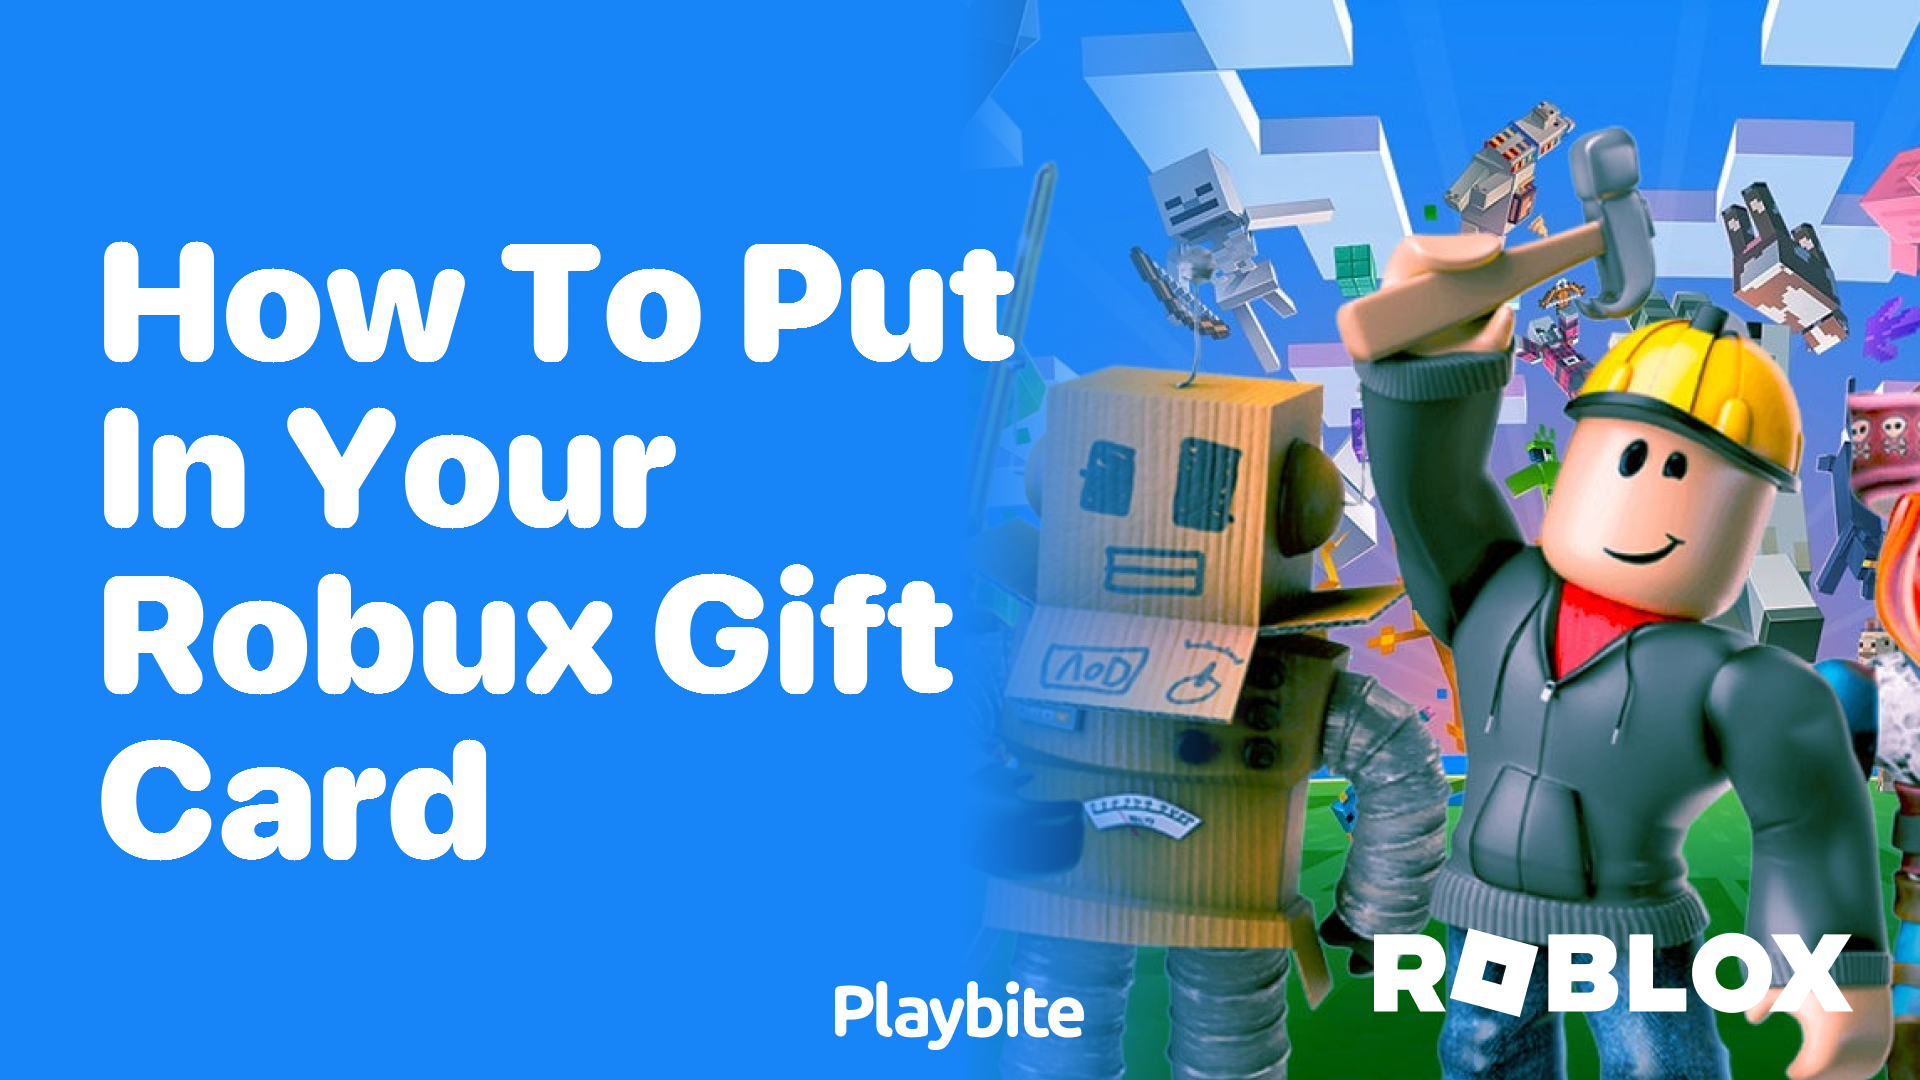 How to Redeem Your Robux Gift Card